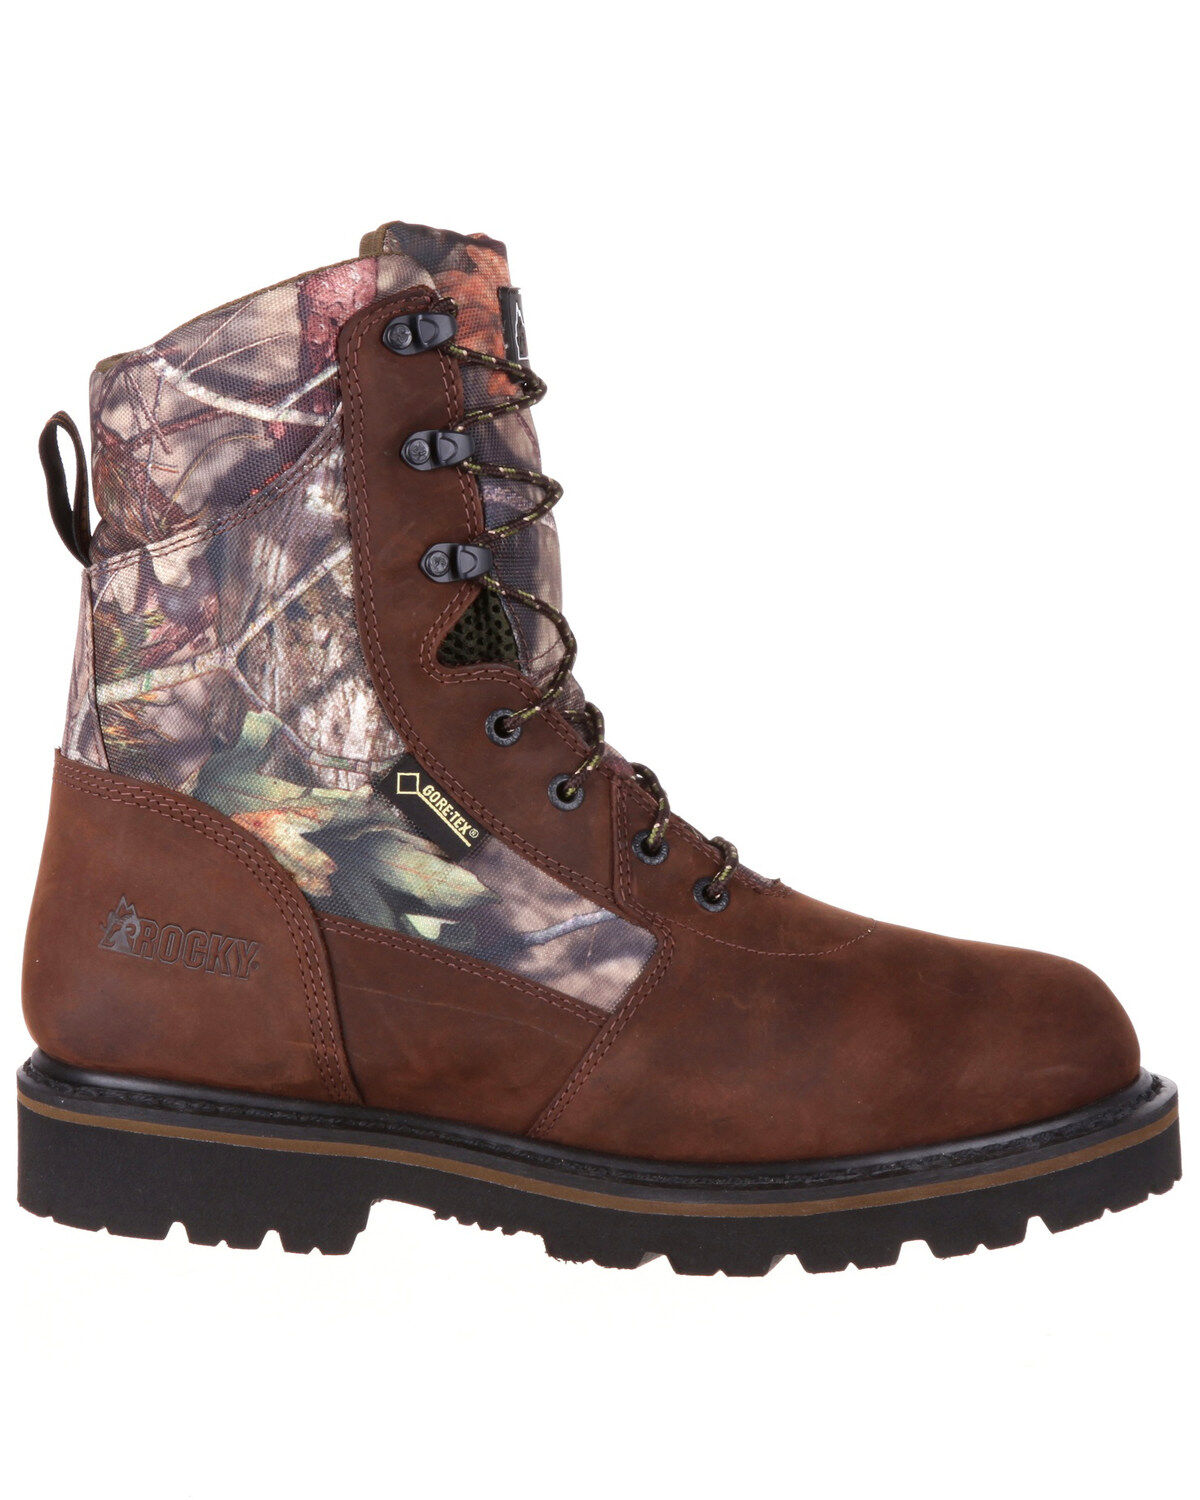 mens gore tex hunting boots